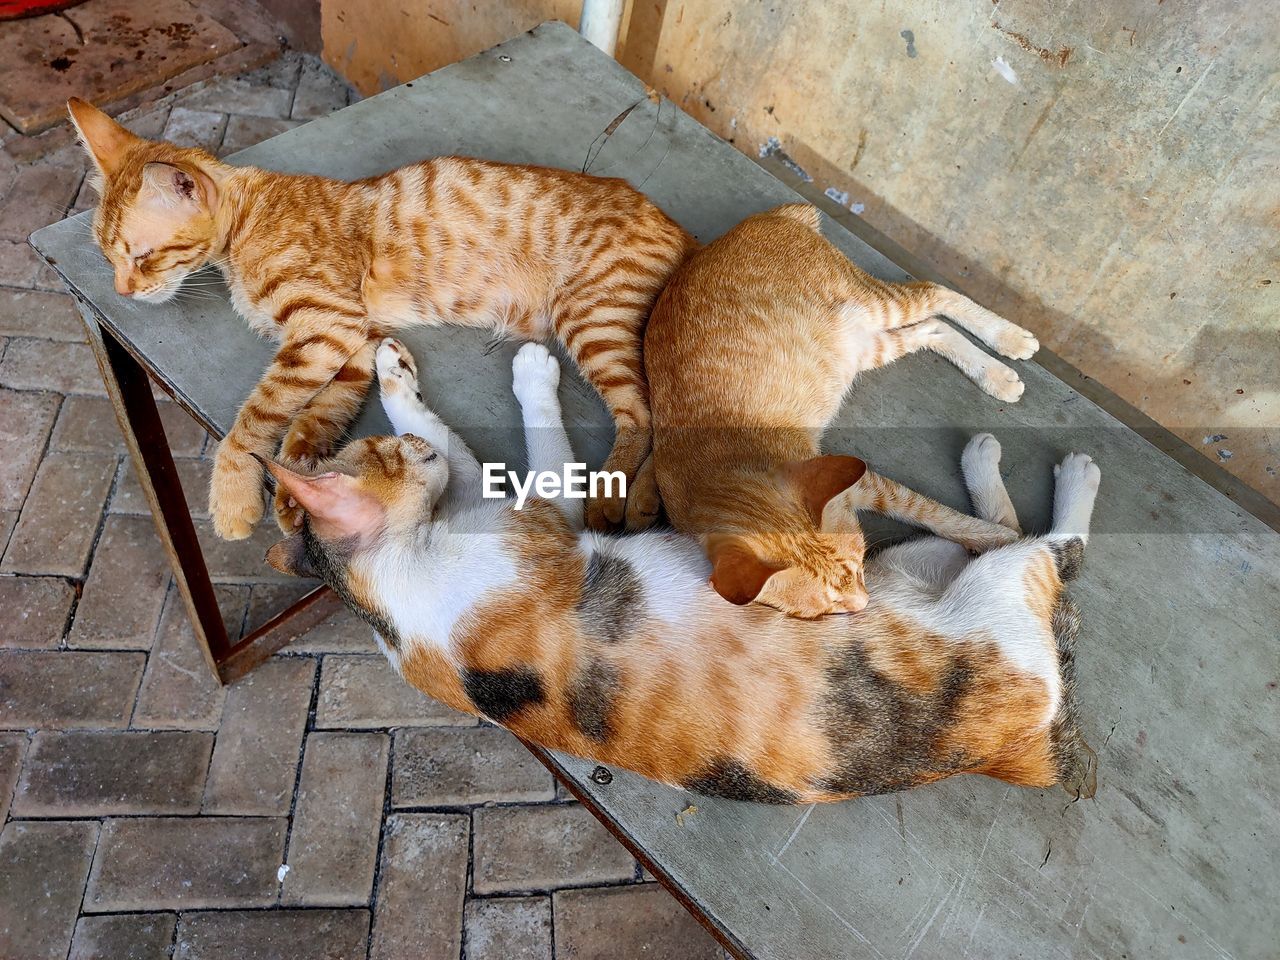 HIGH ANGLE VIEW OF CATS SLEEPING IN A FLOOR